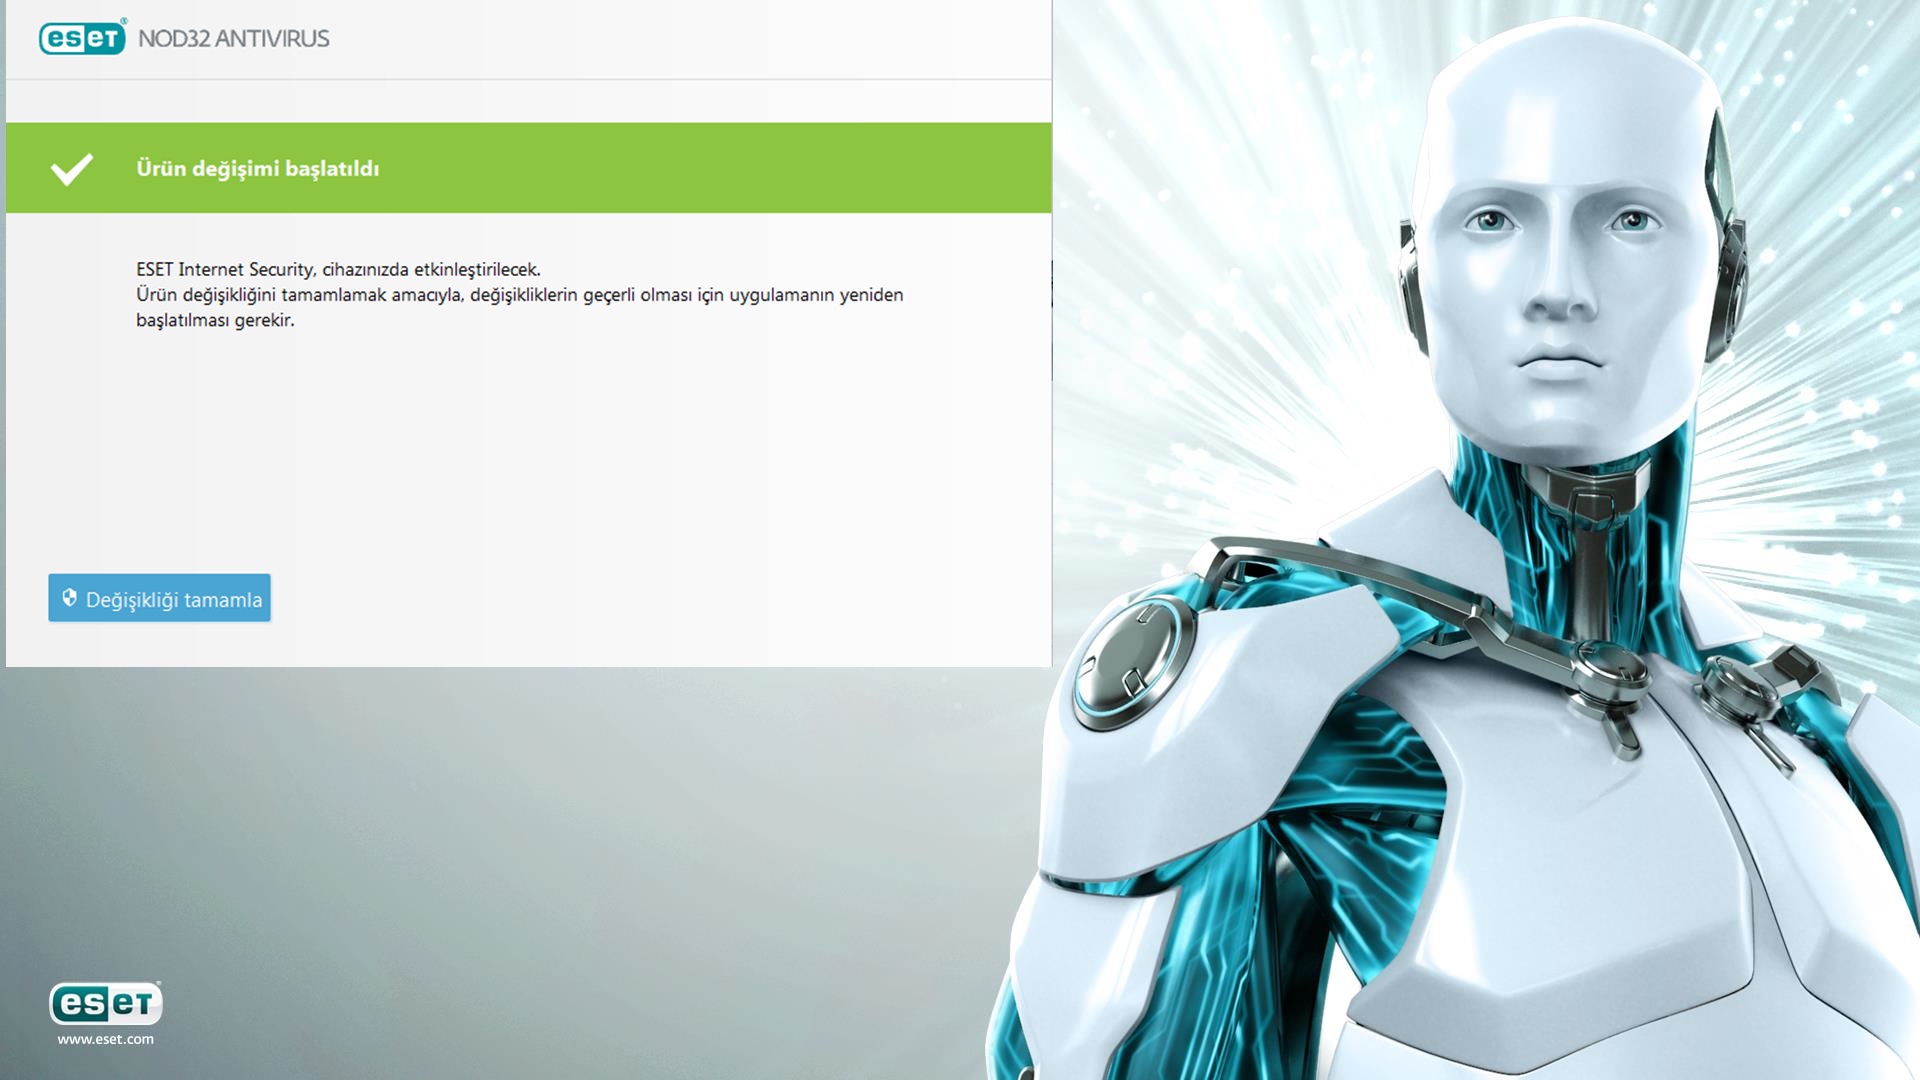 2. ESET Free Trial Keys for All Products - wide 6